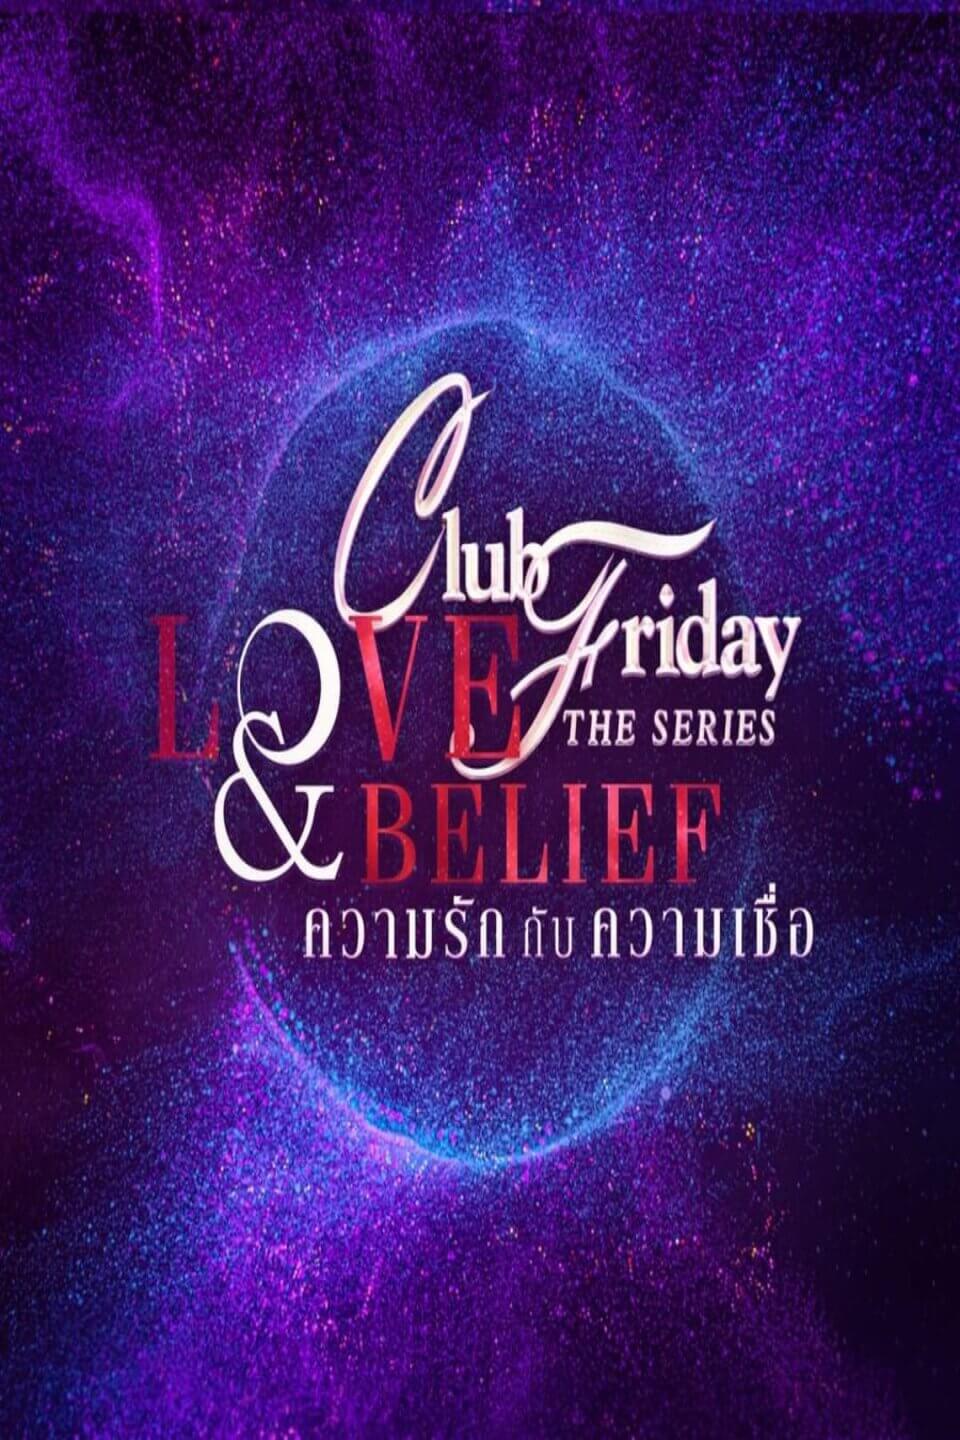 Club Friday 14: Love & Belief (คลับฟรายเดย์เดอะซีรีส์ 14 Love And Belief  ความรักกับความเชื่อ) (One31): United States daily TV audience insights for  smarter content decisions - Parrot Analytics